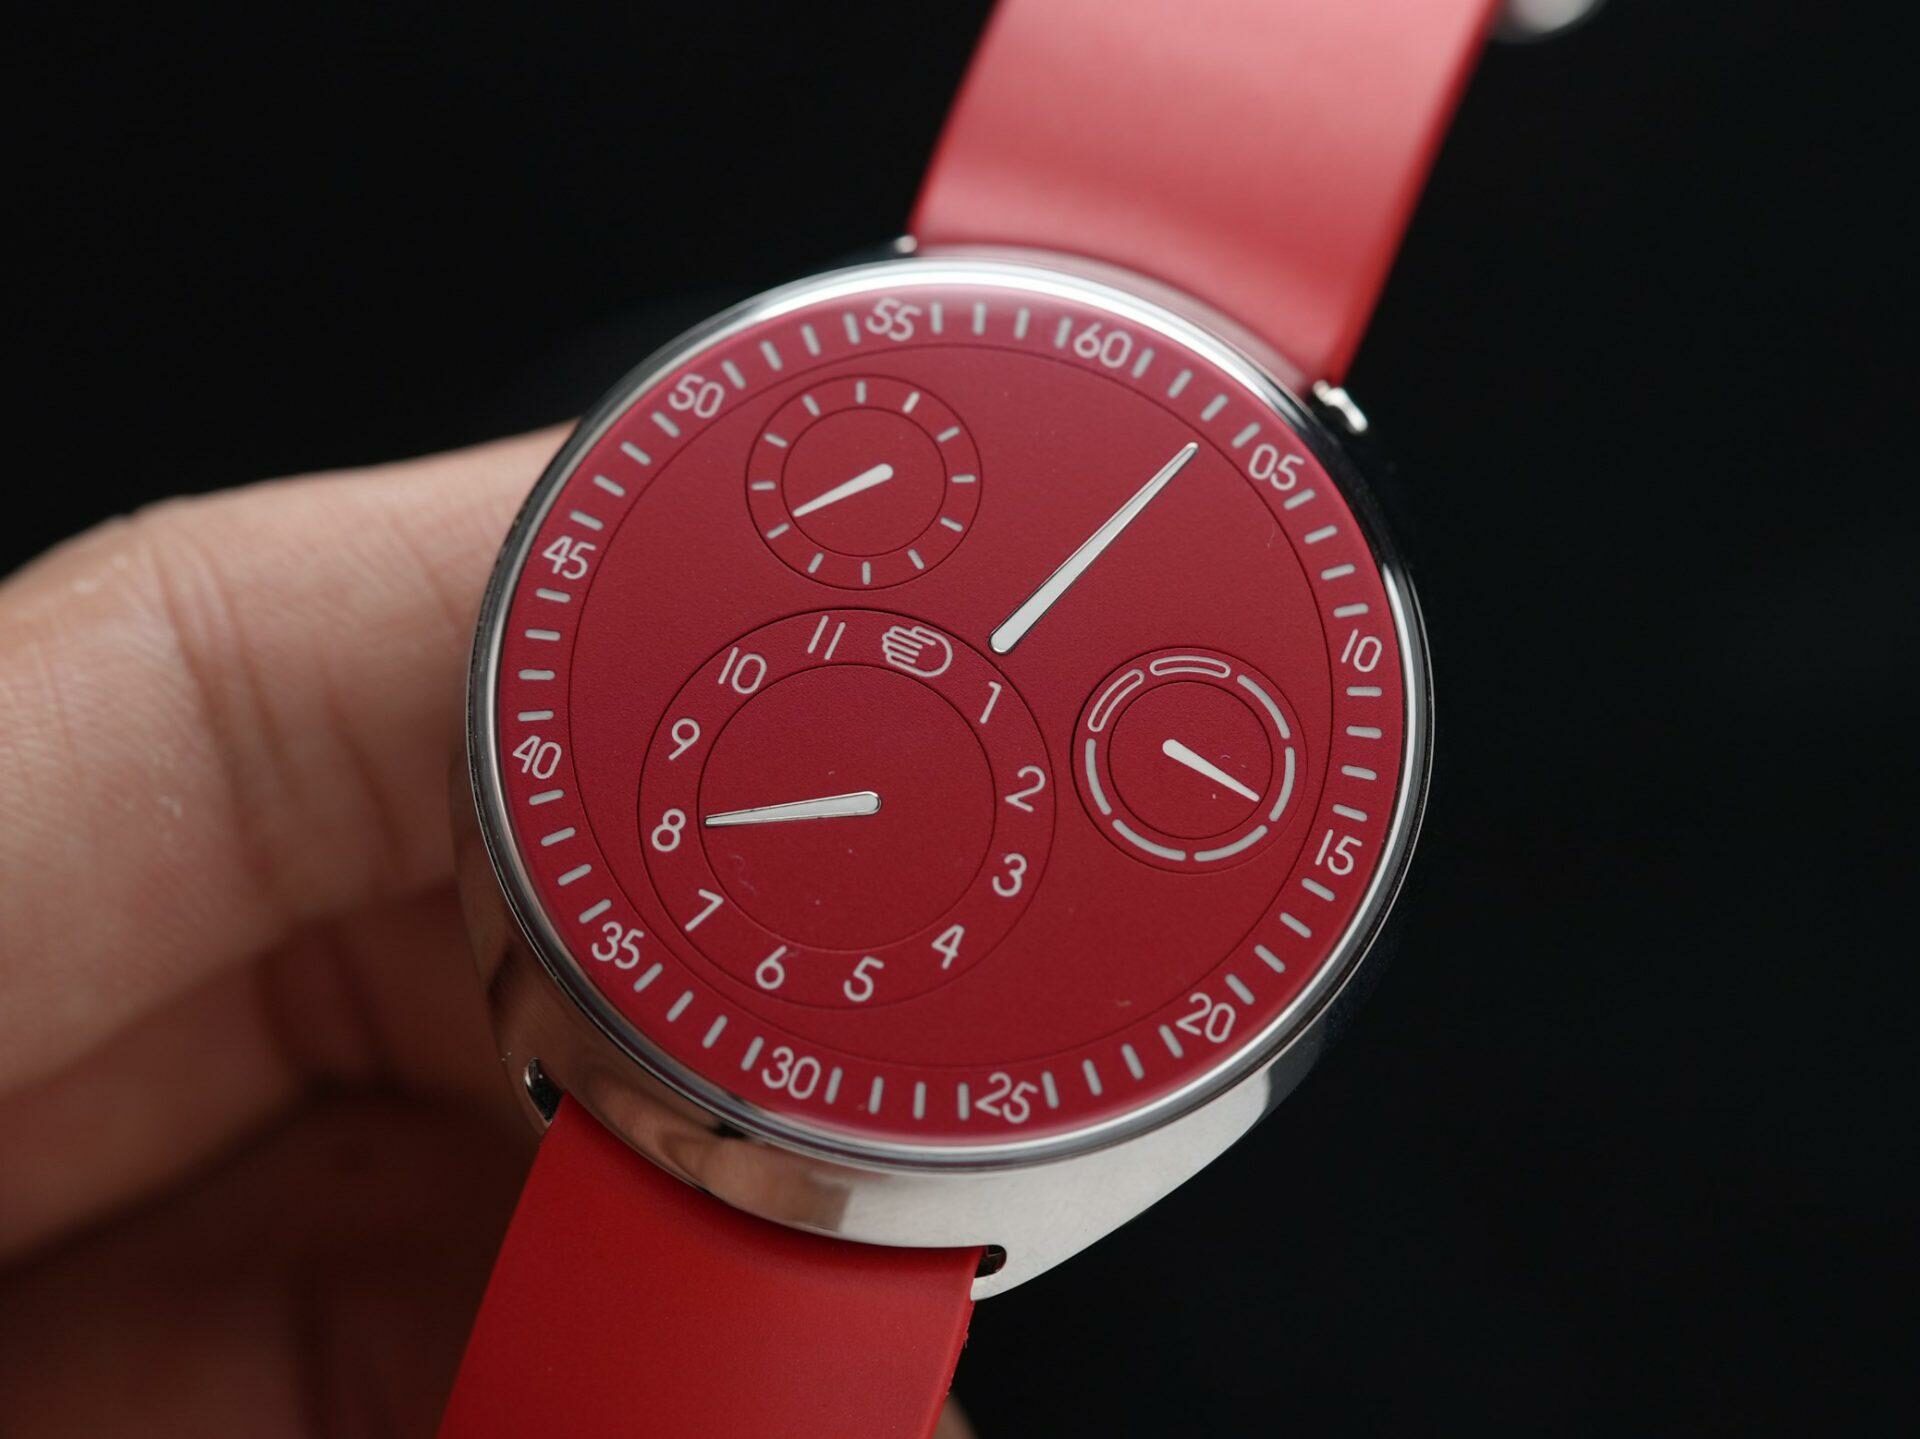 Ressence Type 1 Slim Red being held and displayed in hand.